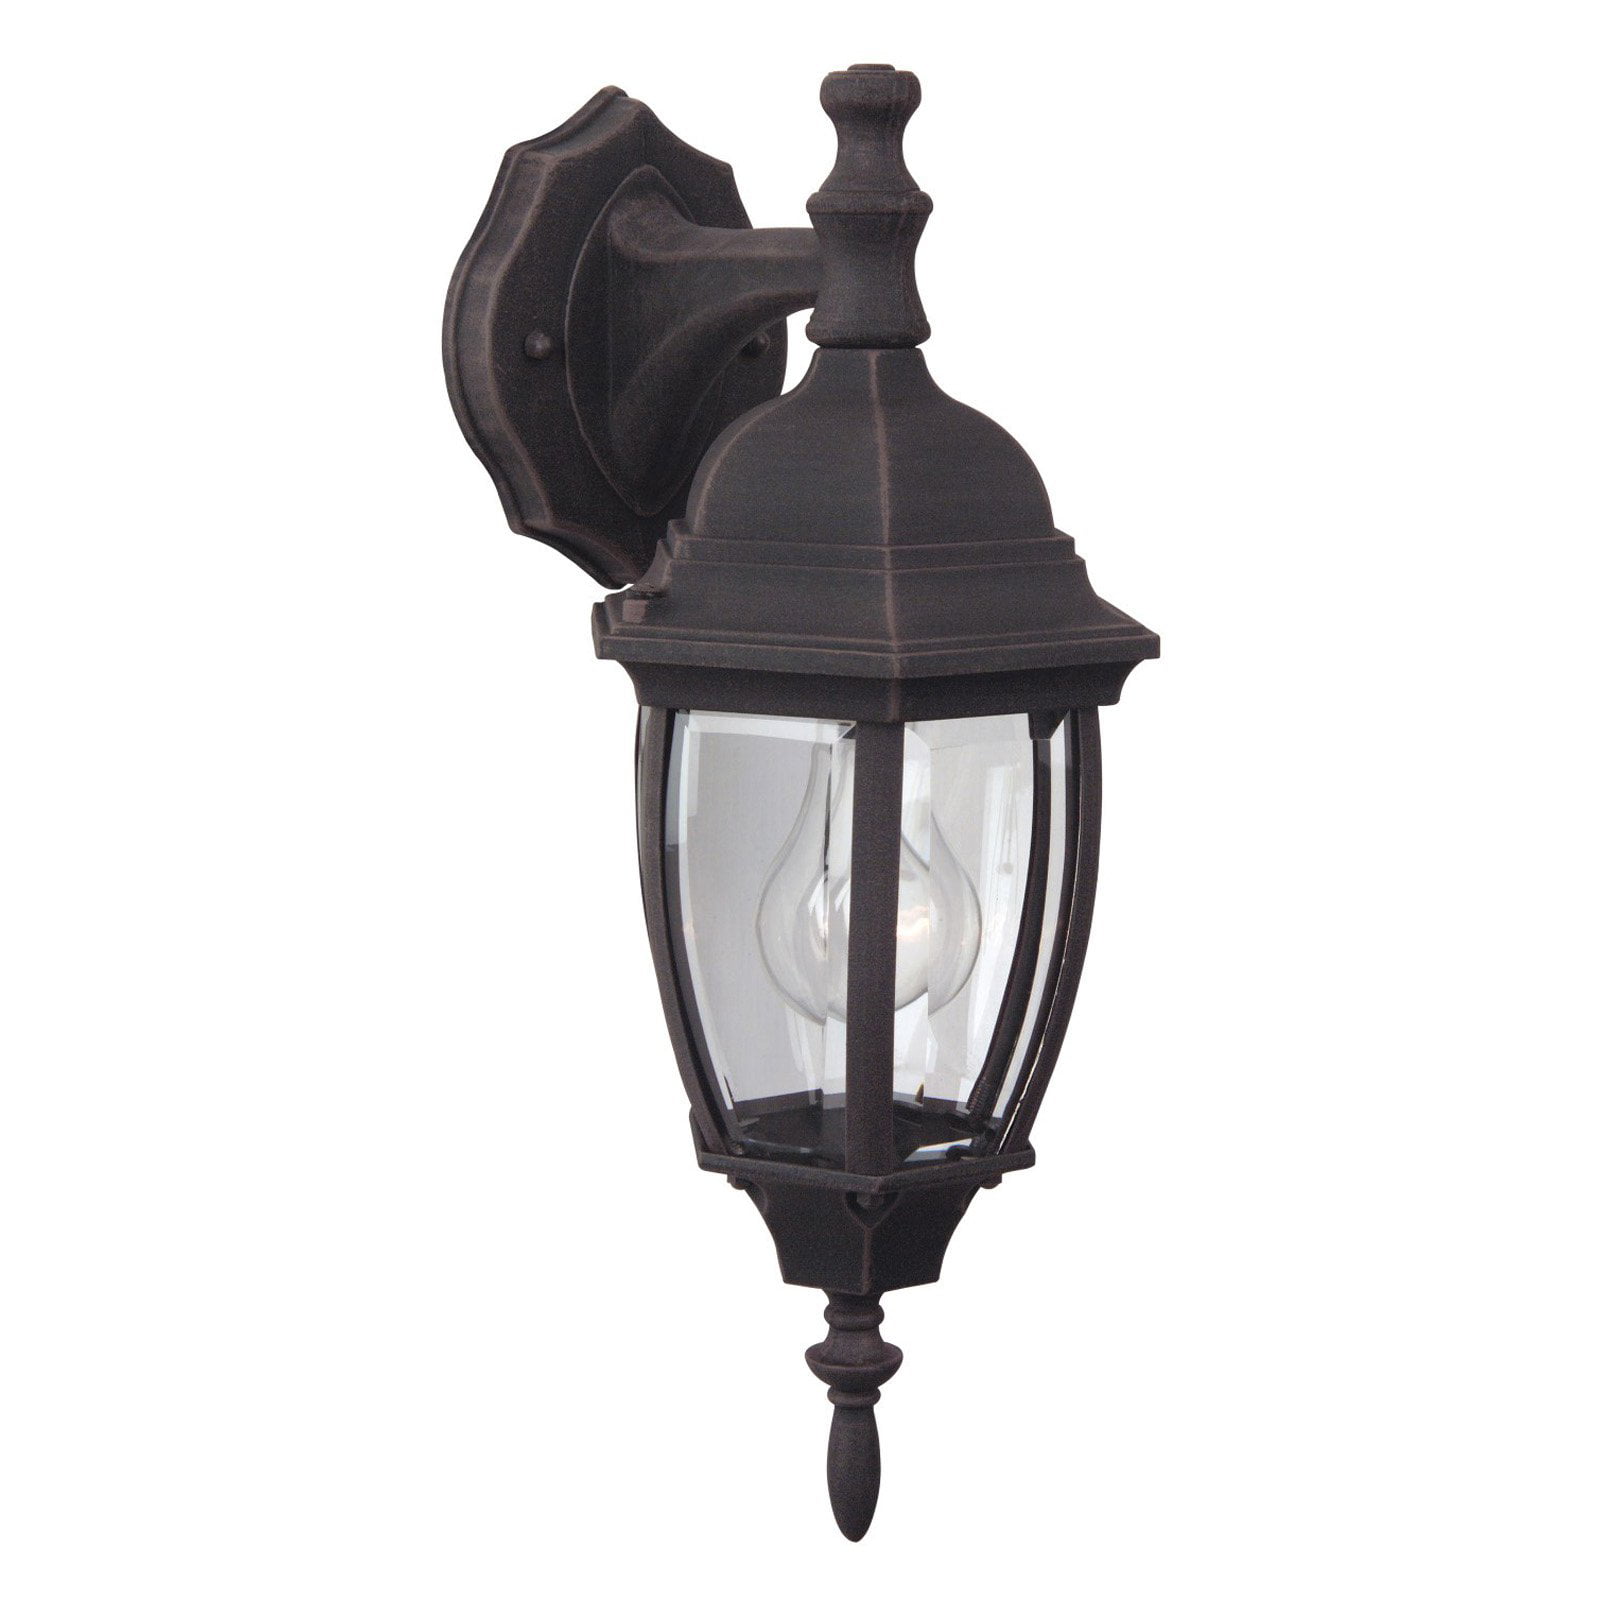 Jelly Jar Lighting PT-RT-008 Powder Coat Rust Finished Sconce with a Powder Coat Rust Shade